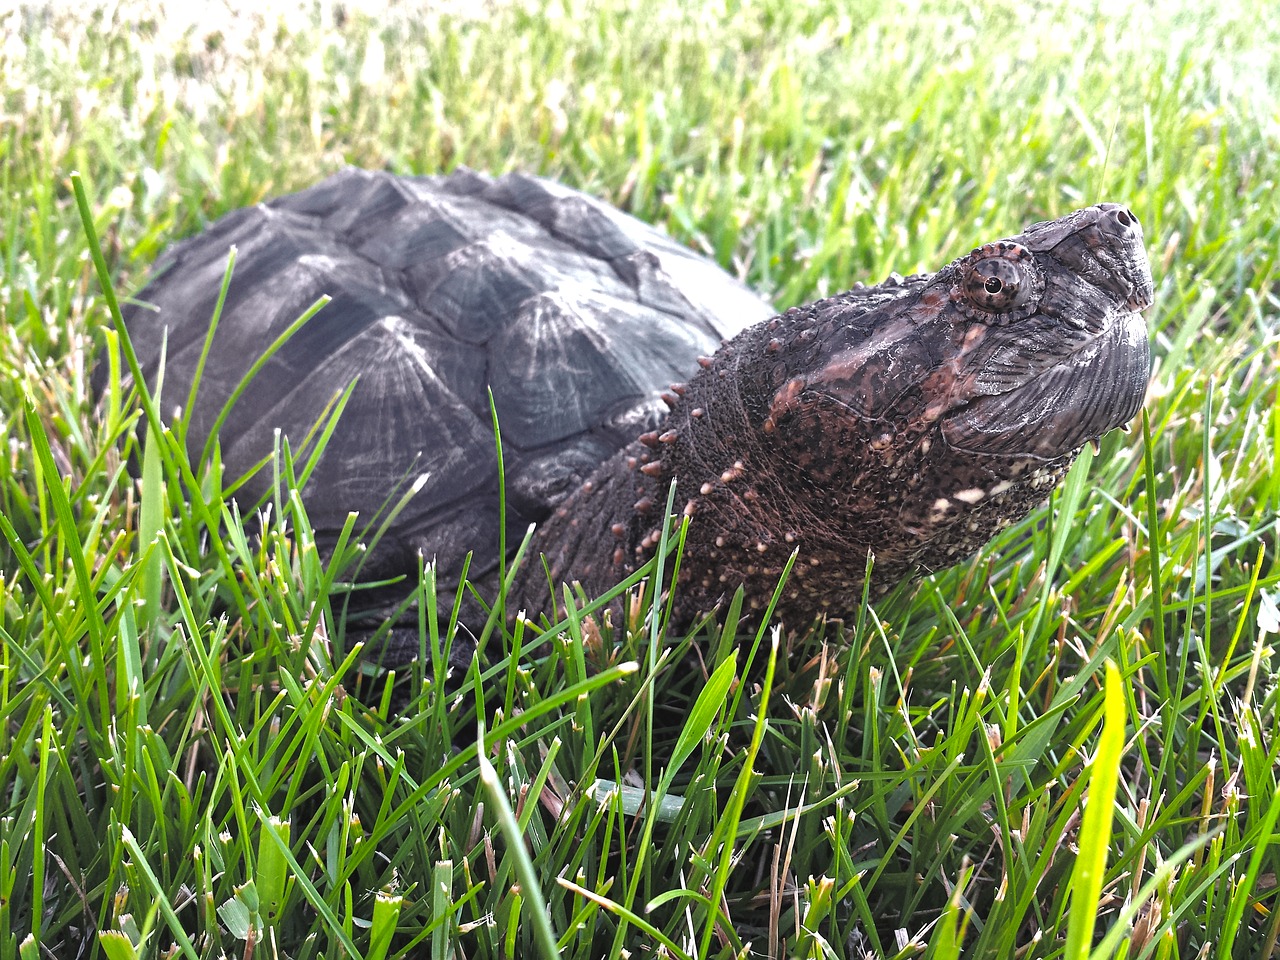 snapping turtle snapper free photo